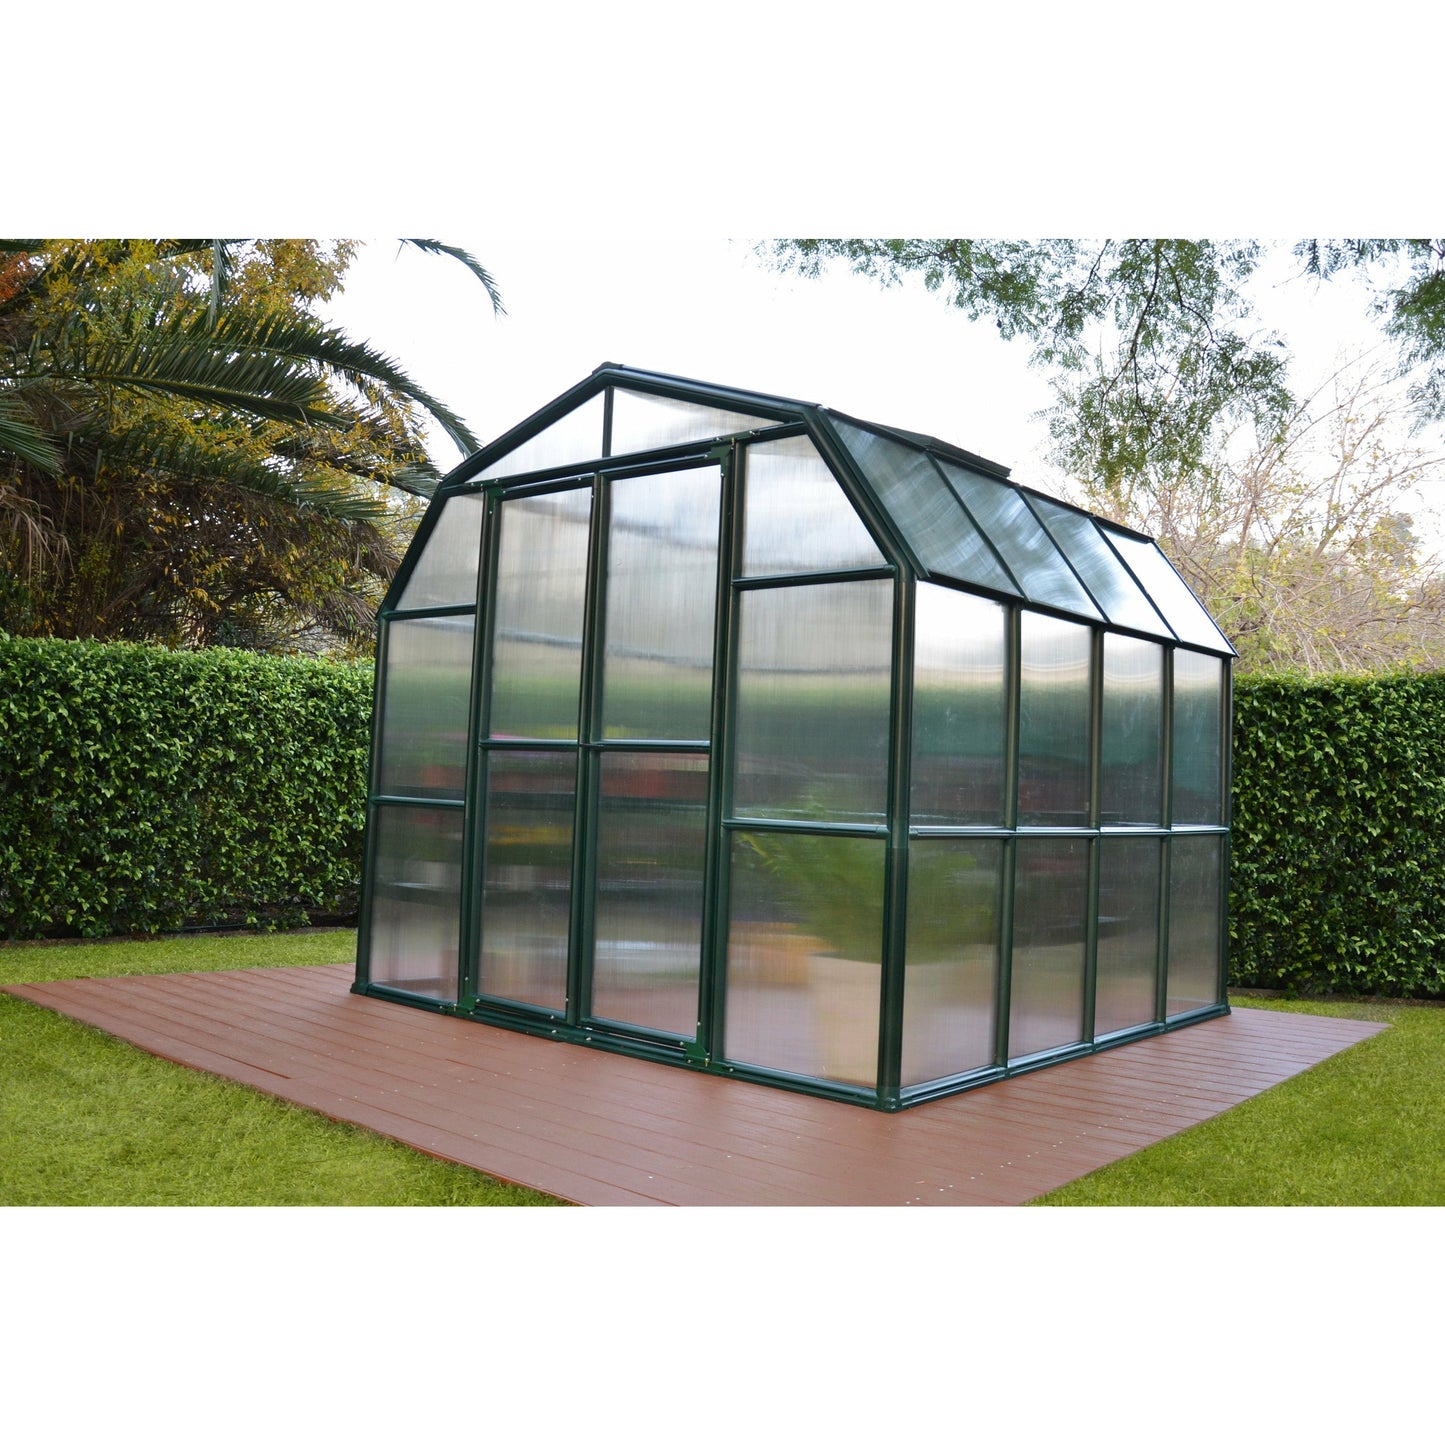 Rion Grand Gardener 8' x 8' Greenhouse - Clear